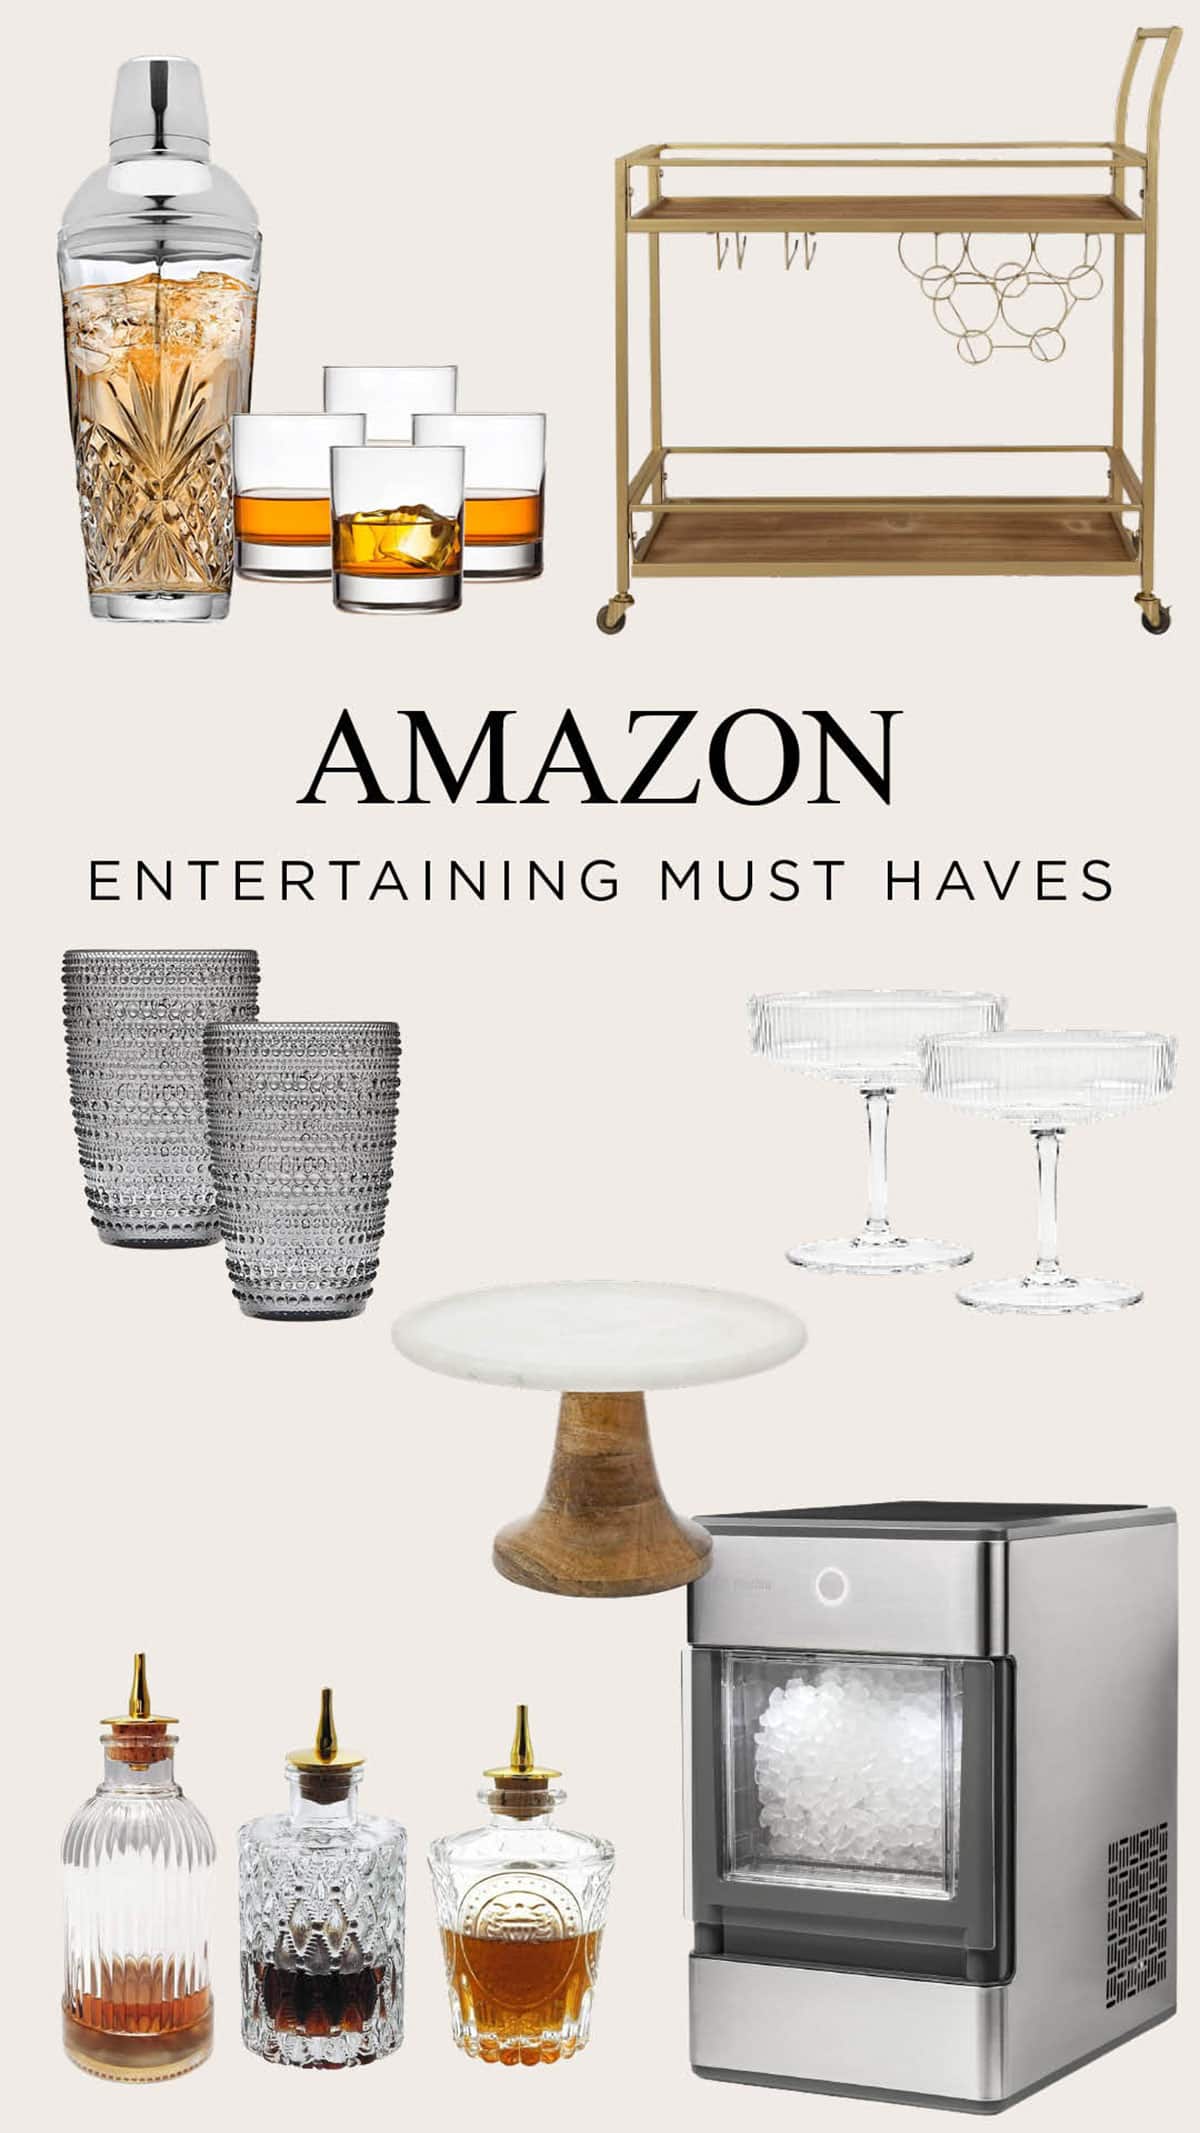 Amazon Prime Sale - entertaining must haves for the kitchen and dining room